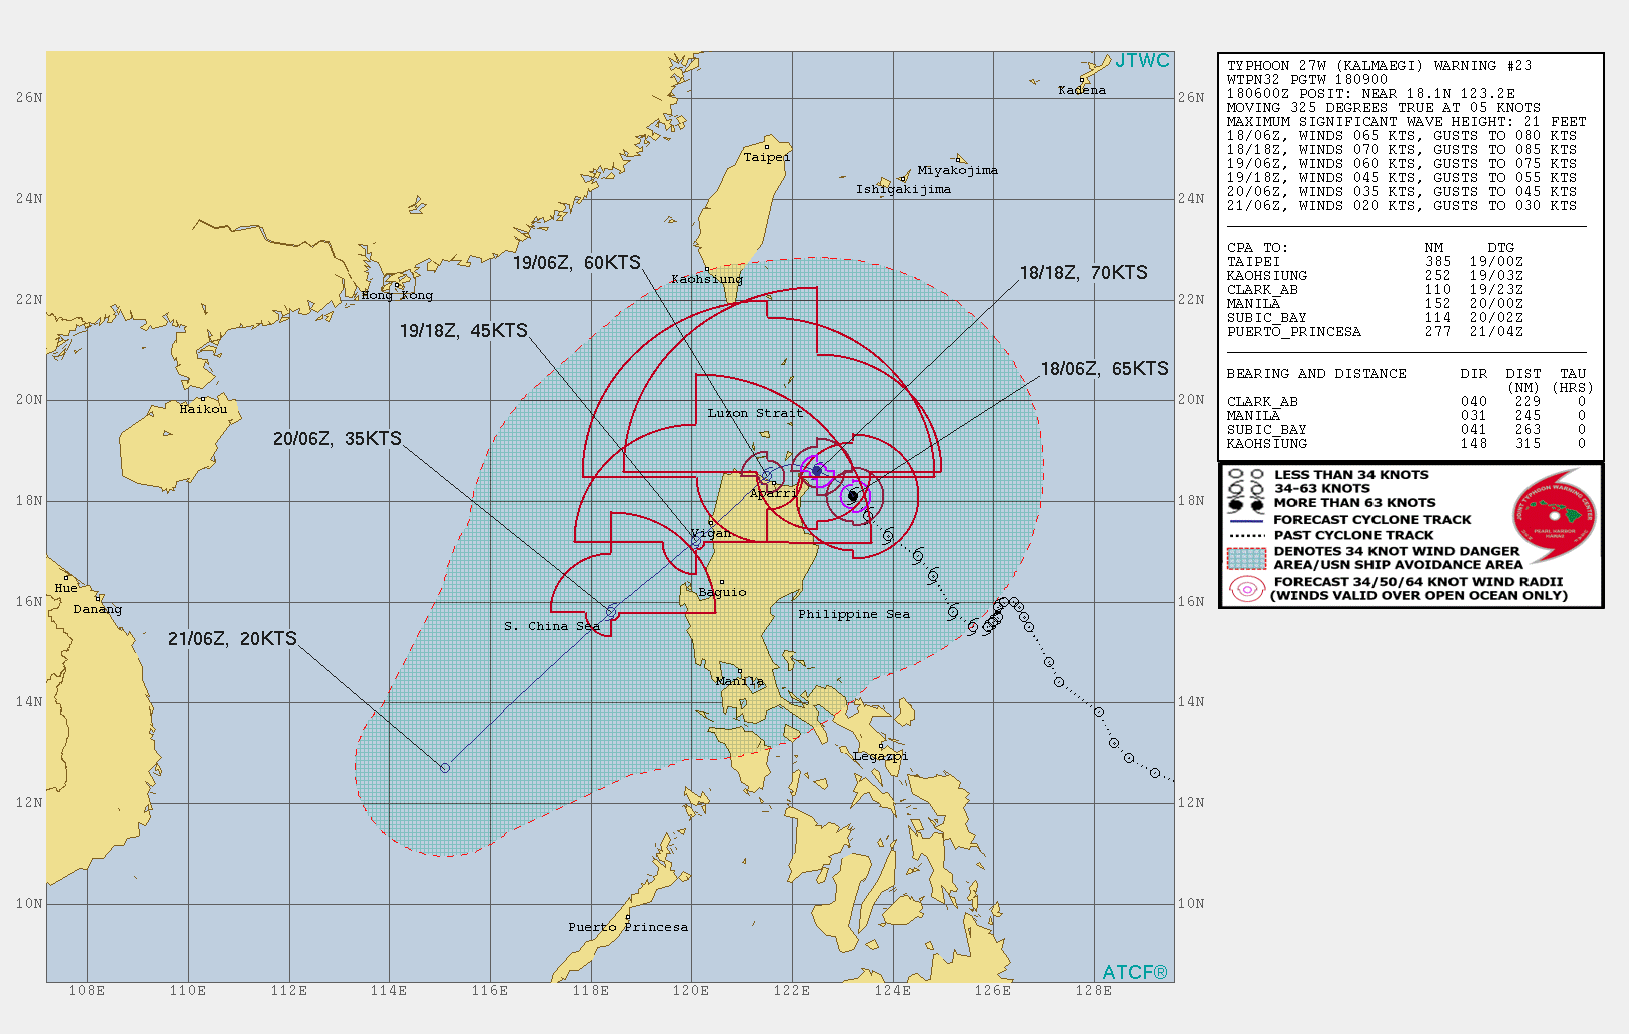 Typhoon Kalmaegi is intensifying, forecast to make landfall over Northern Luzon in apprx 24h